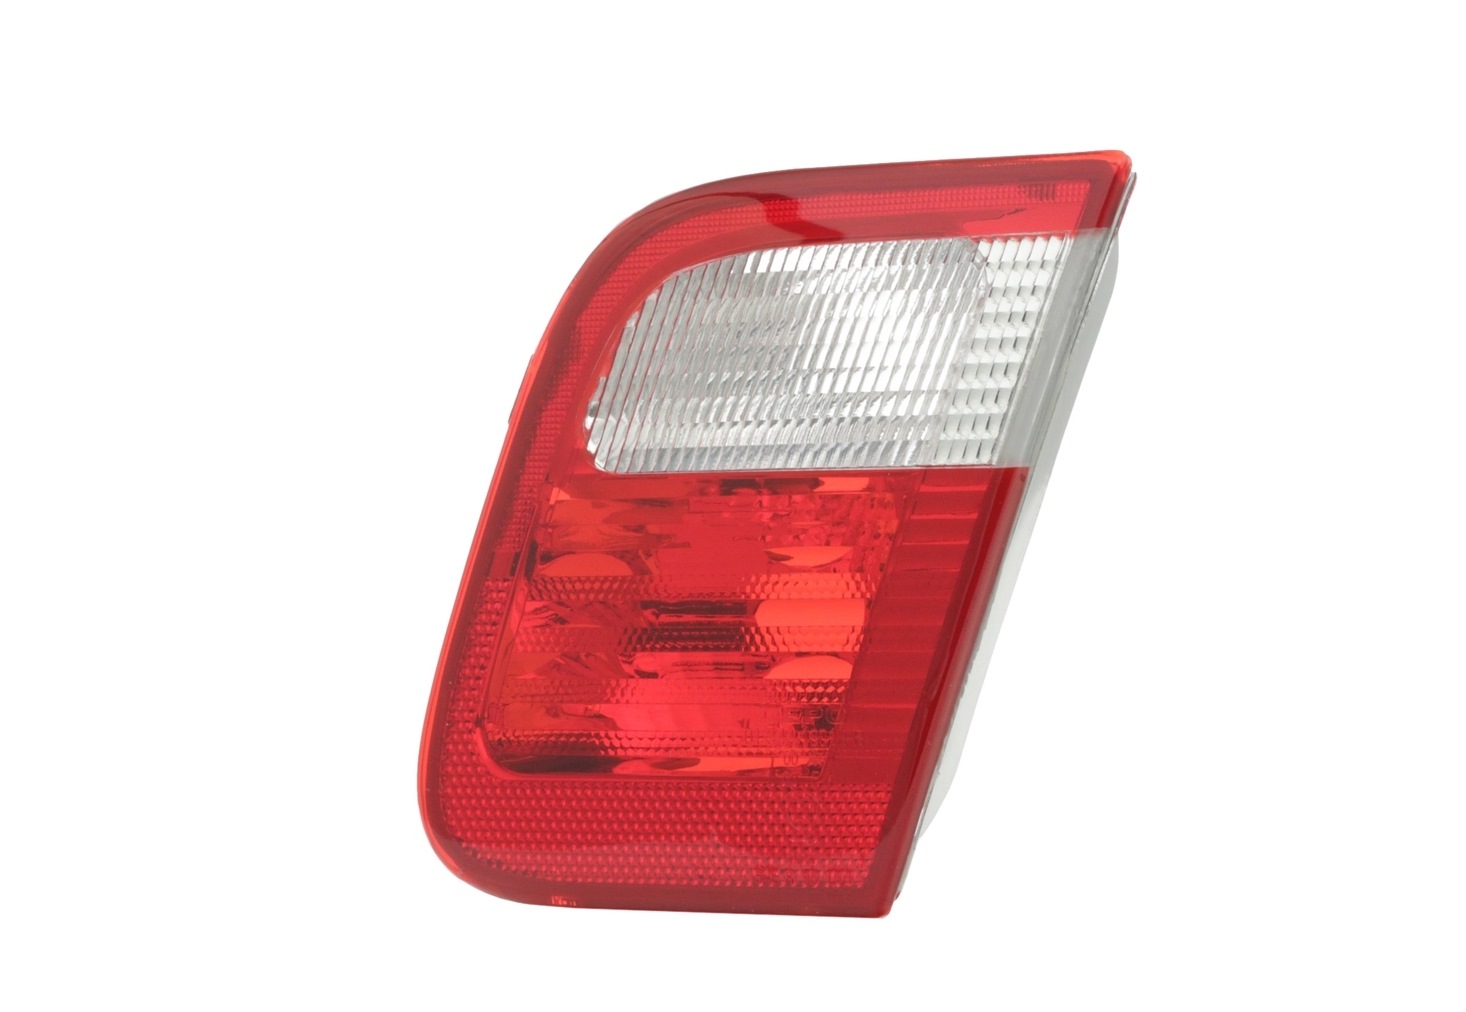 ALKAR 2264849 Rear light ROVER experience and price